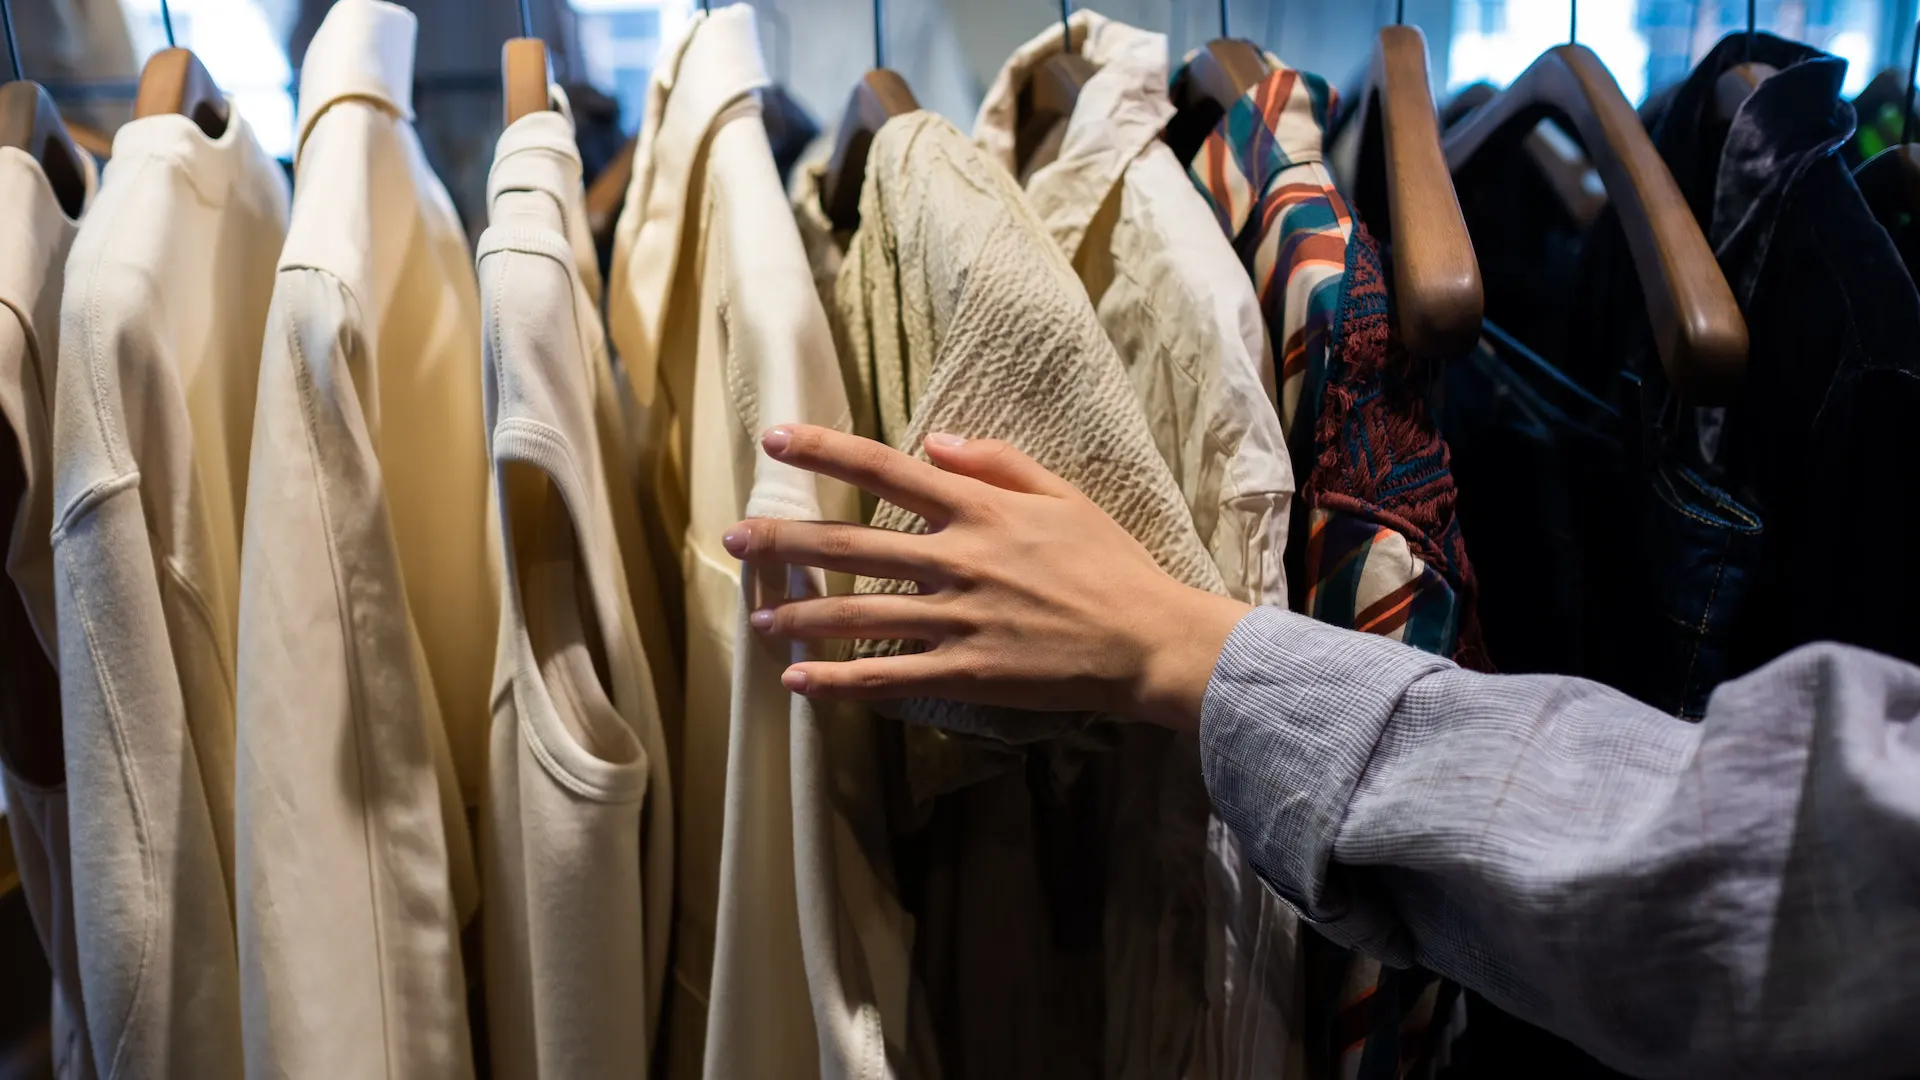 Close up of woman's hands flipping through shirts on a clothes rack